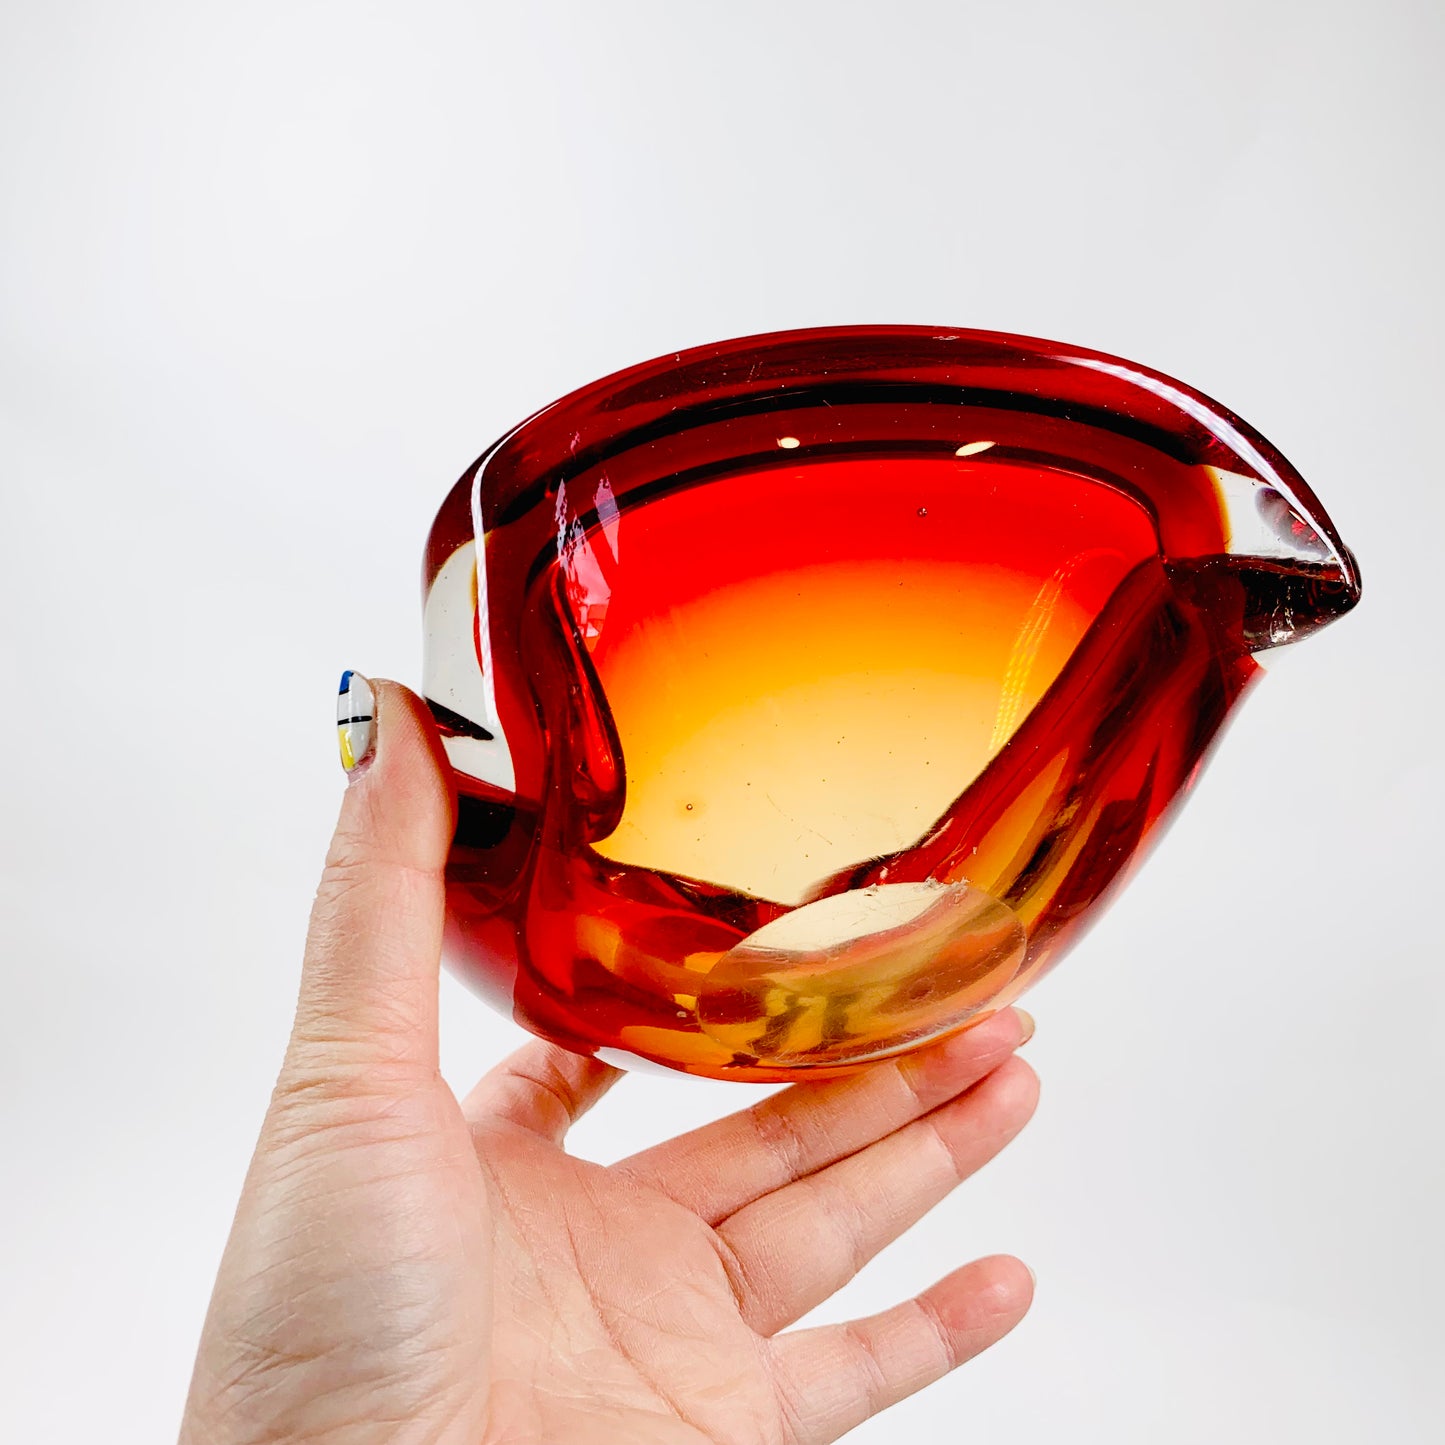 Stunning and rare MCM Murano red orange ombré glass ashtray/bowl